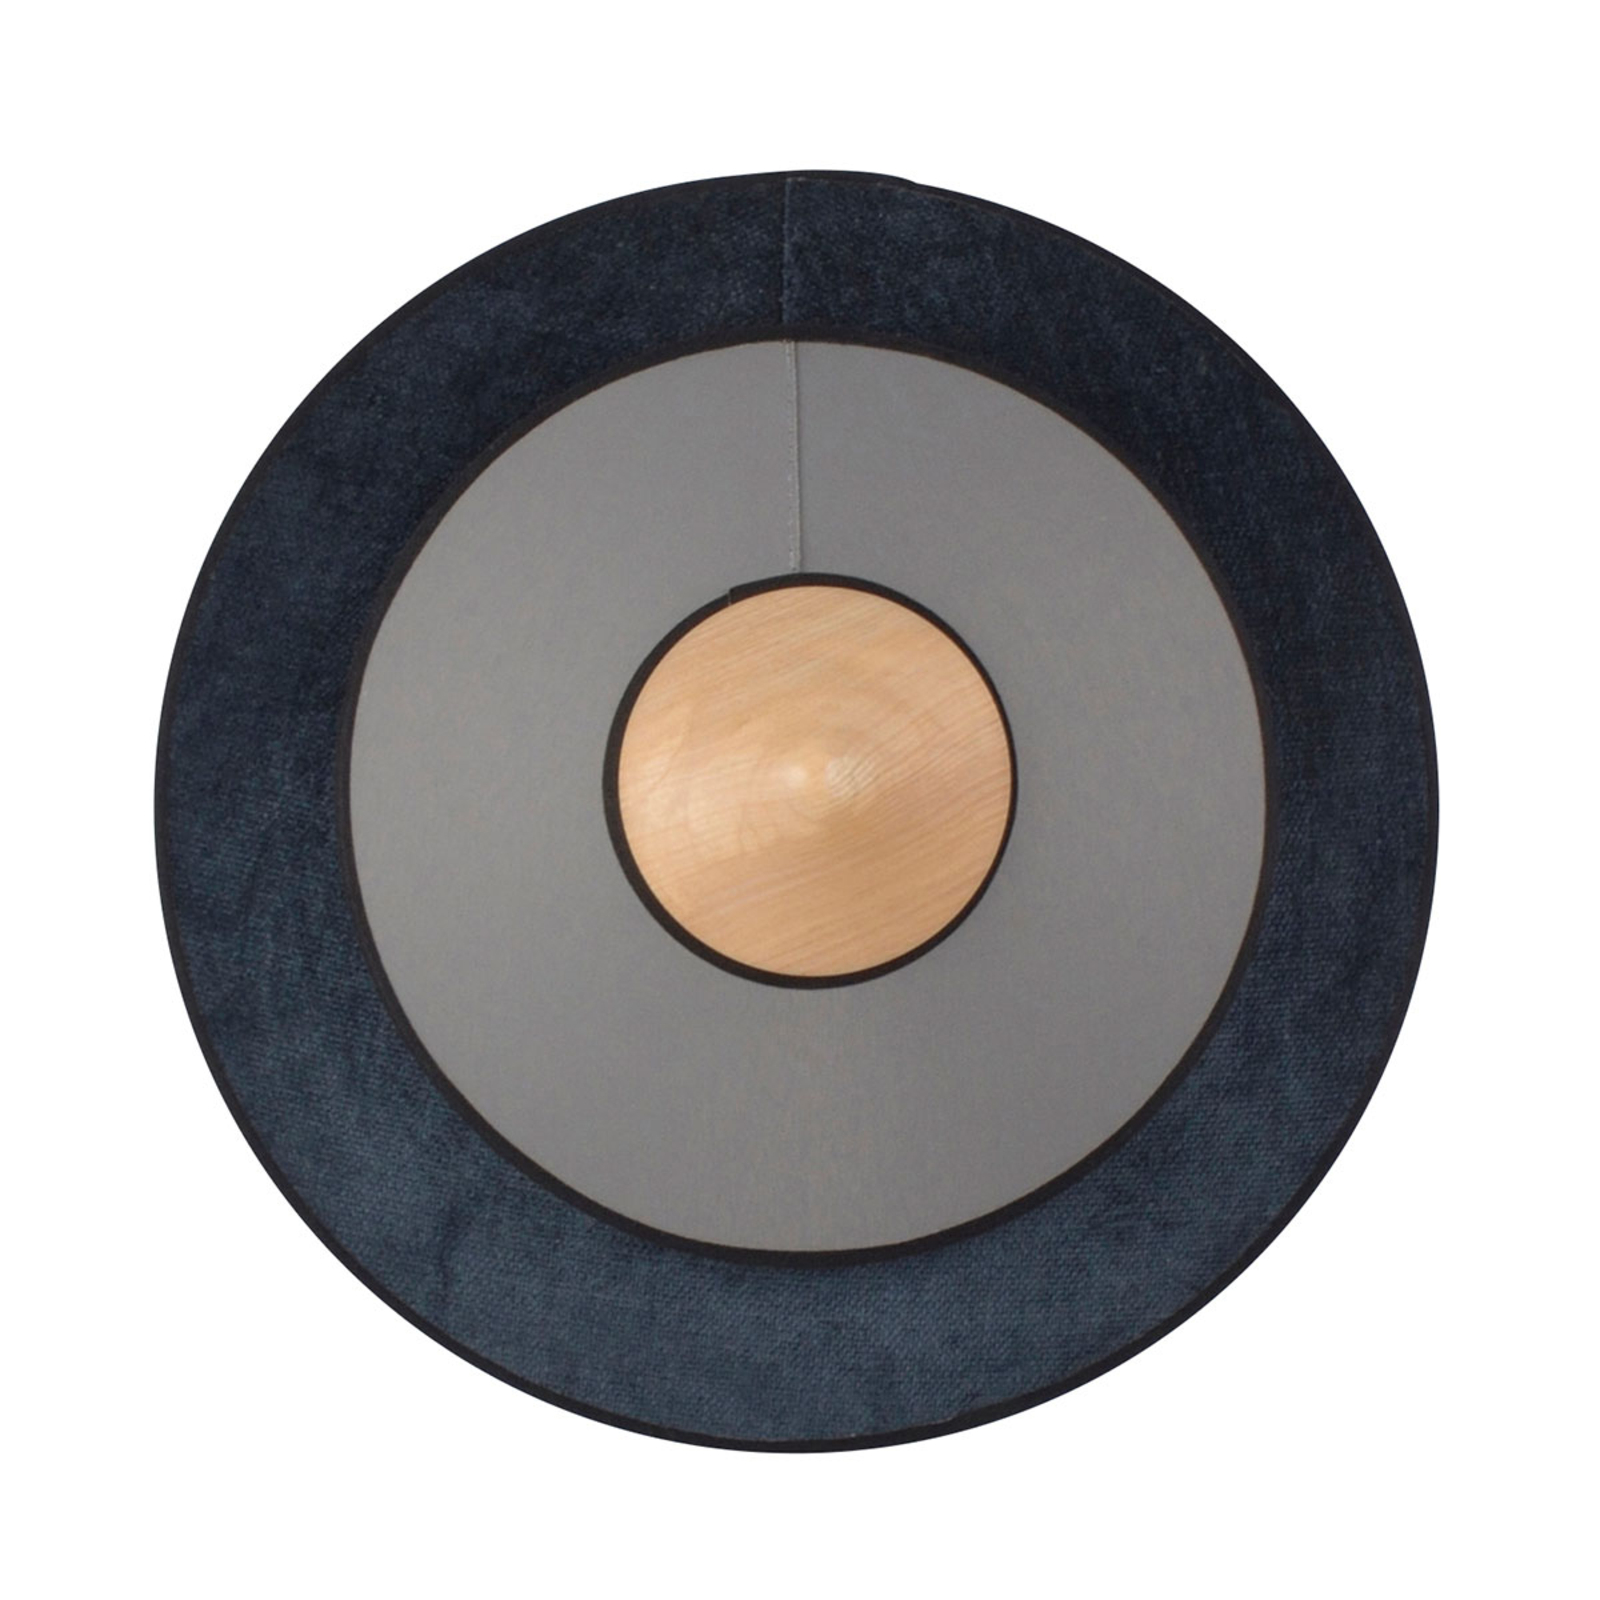 Forestier Cymbal S lámpara de pared LED medianoche